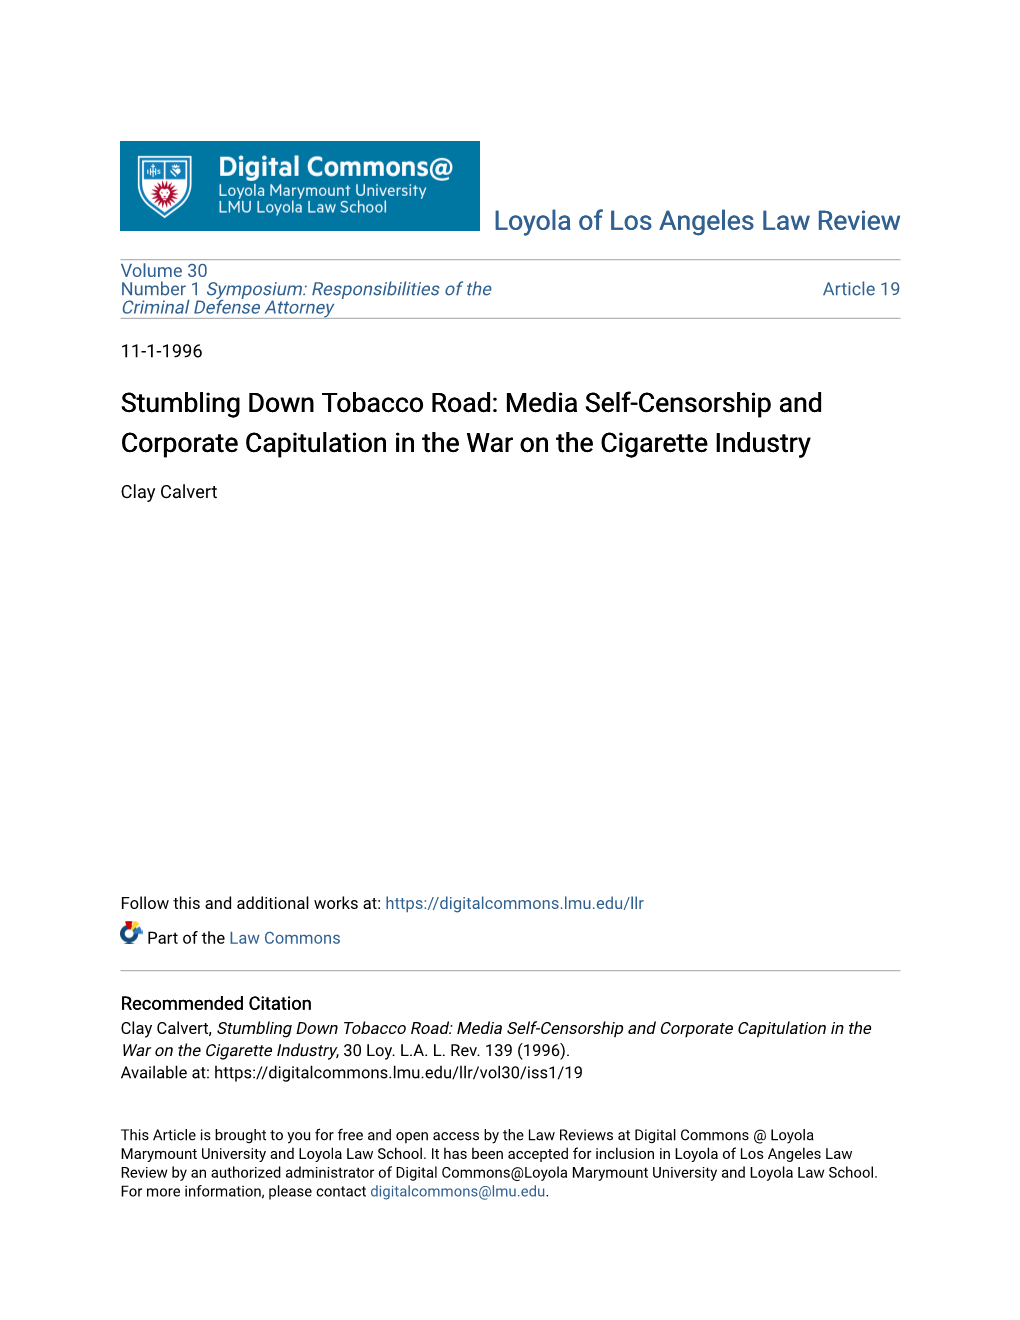 Stumbling Down Tobacco Road: Media Self-Censorship and Corporate Capitulation in the War on the Cigarette Industry